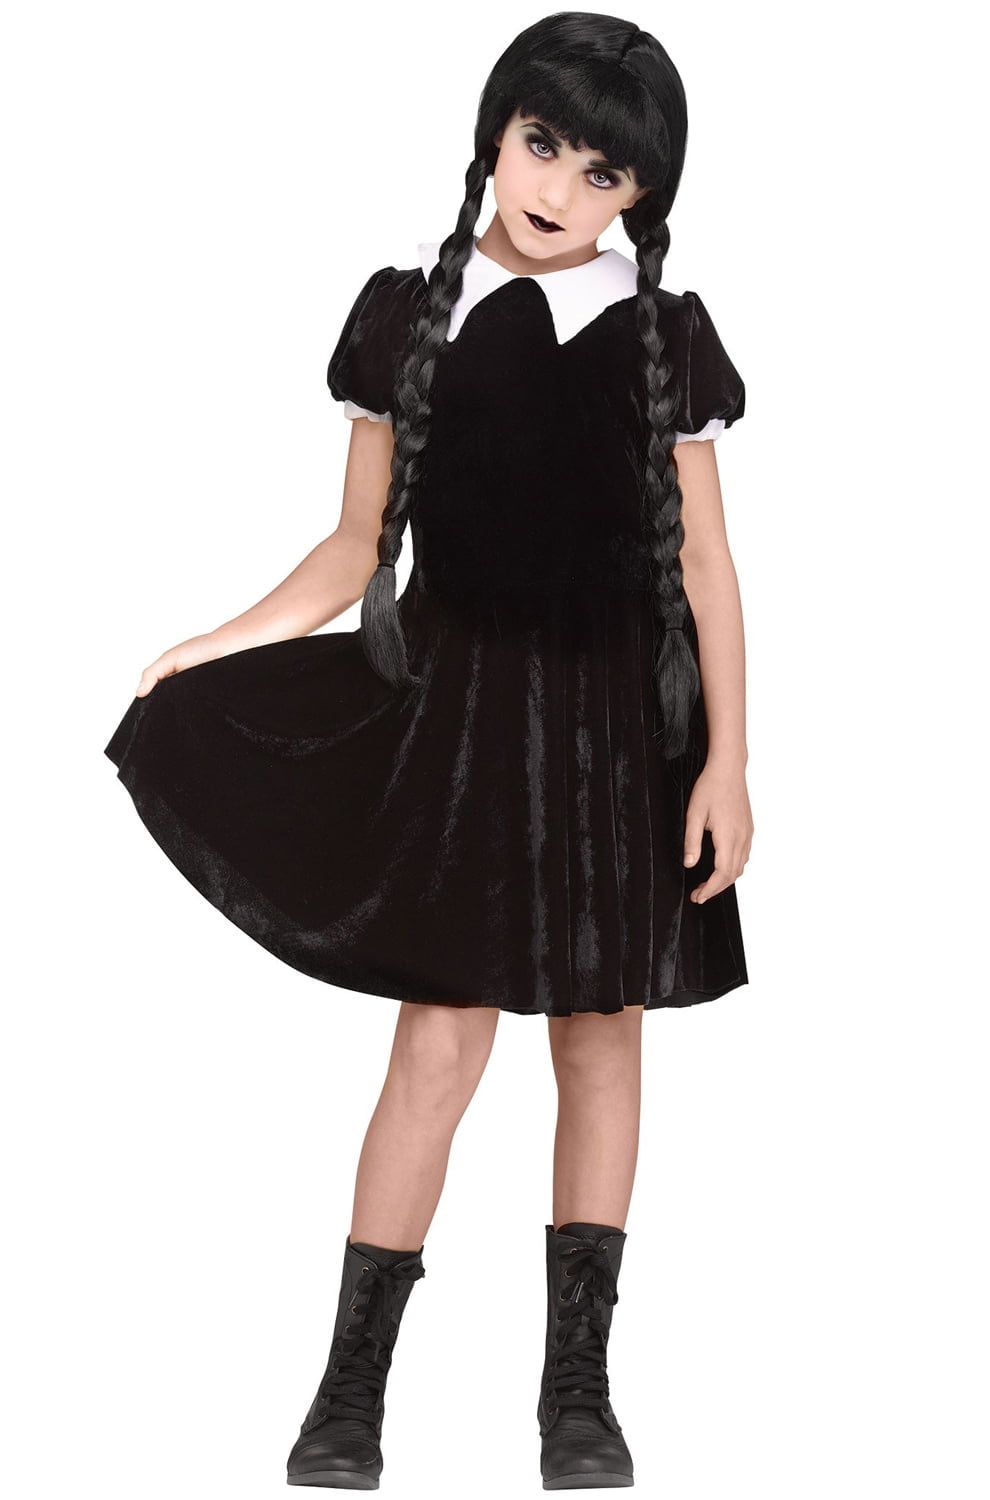 Halloween Wednesday Addams Costume For Kids Girl Fancy Carnival Party  Princess Black Dresses Cosplay Children Clothing 3-8Y